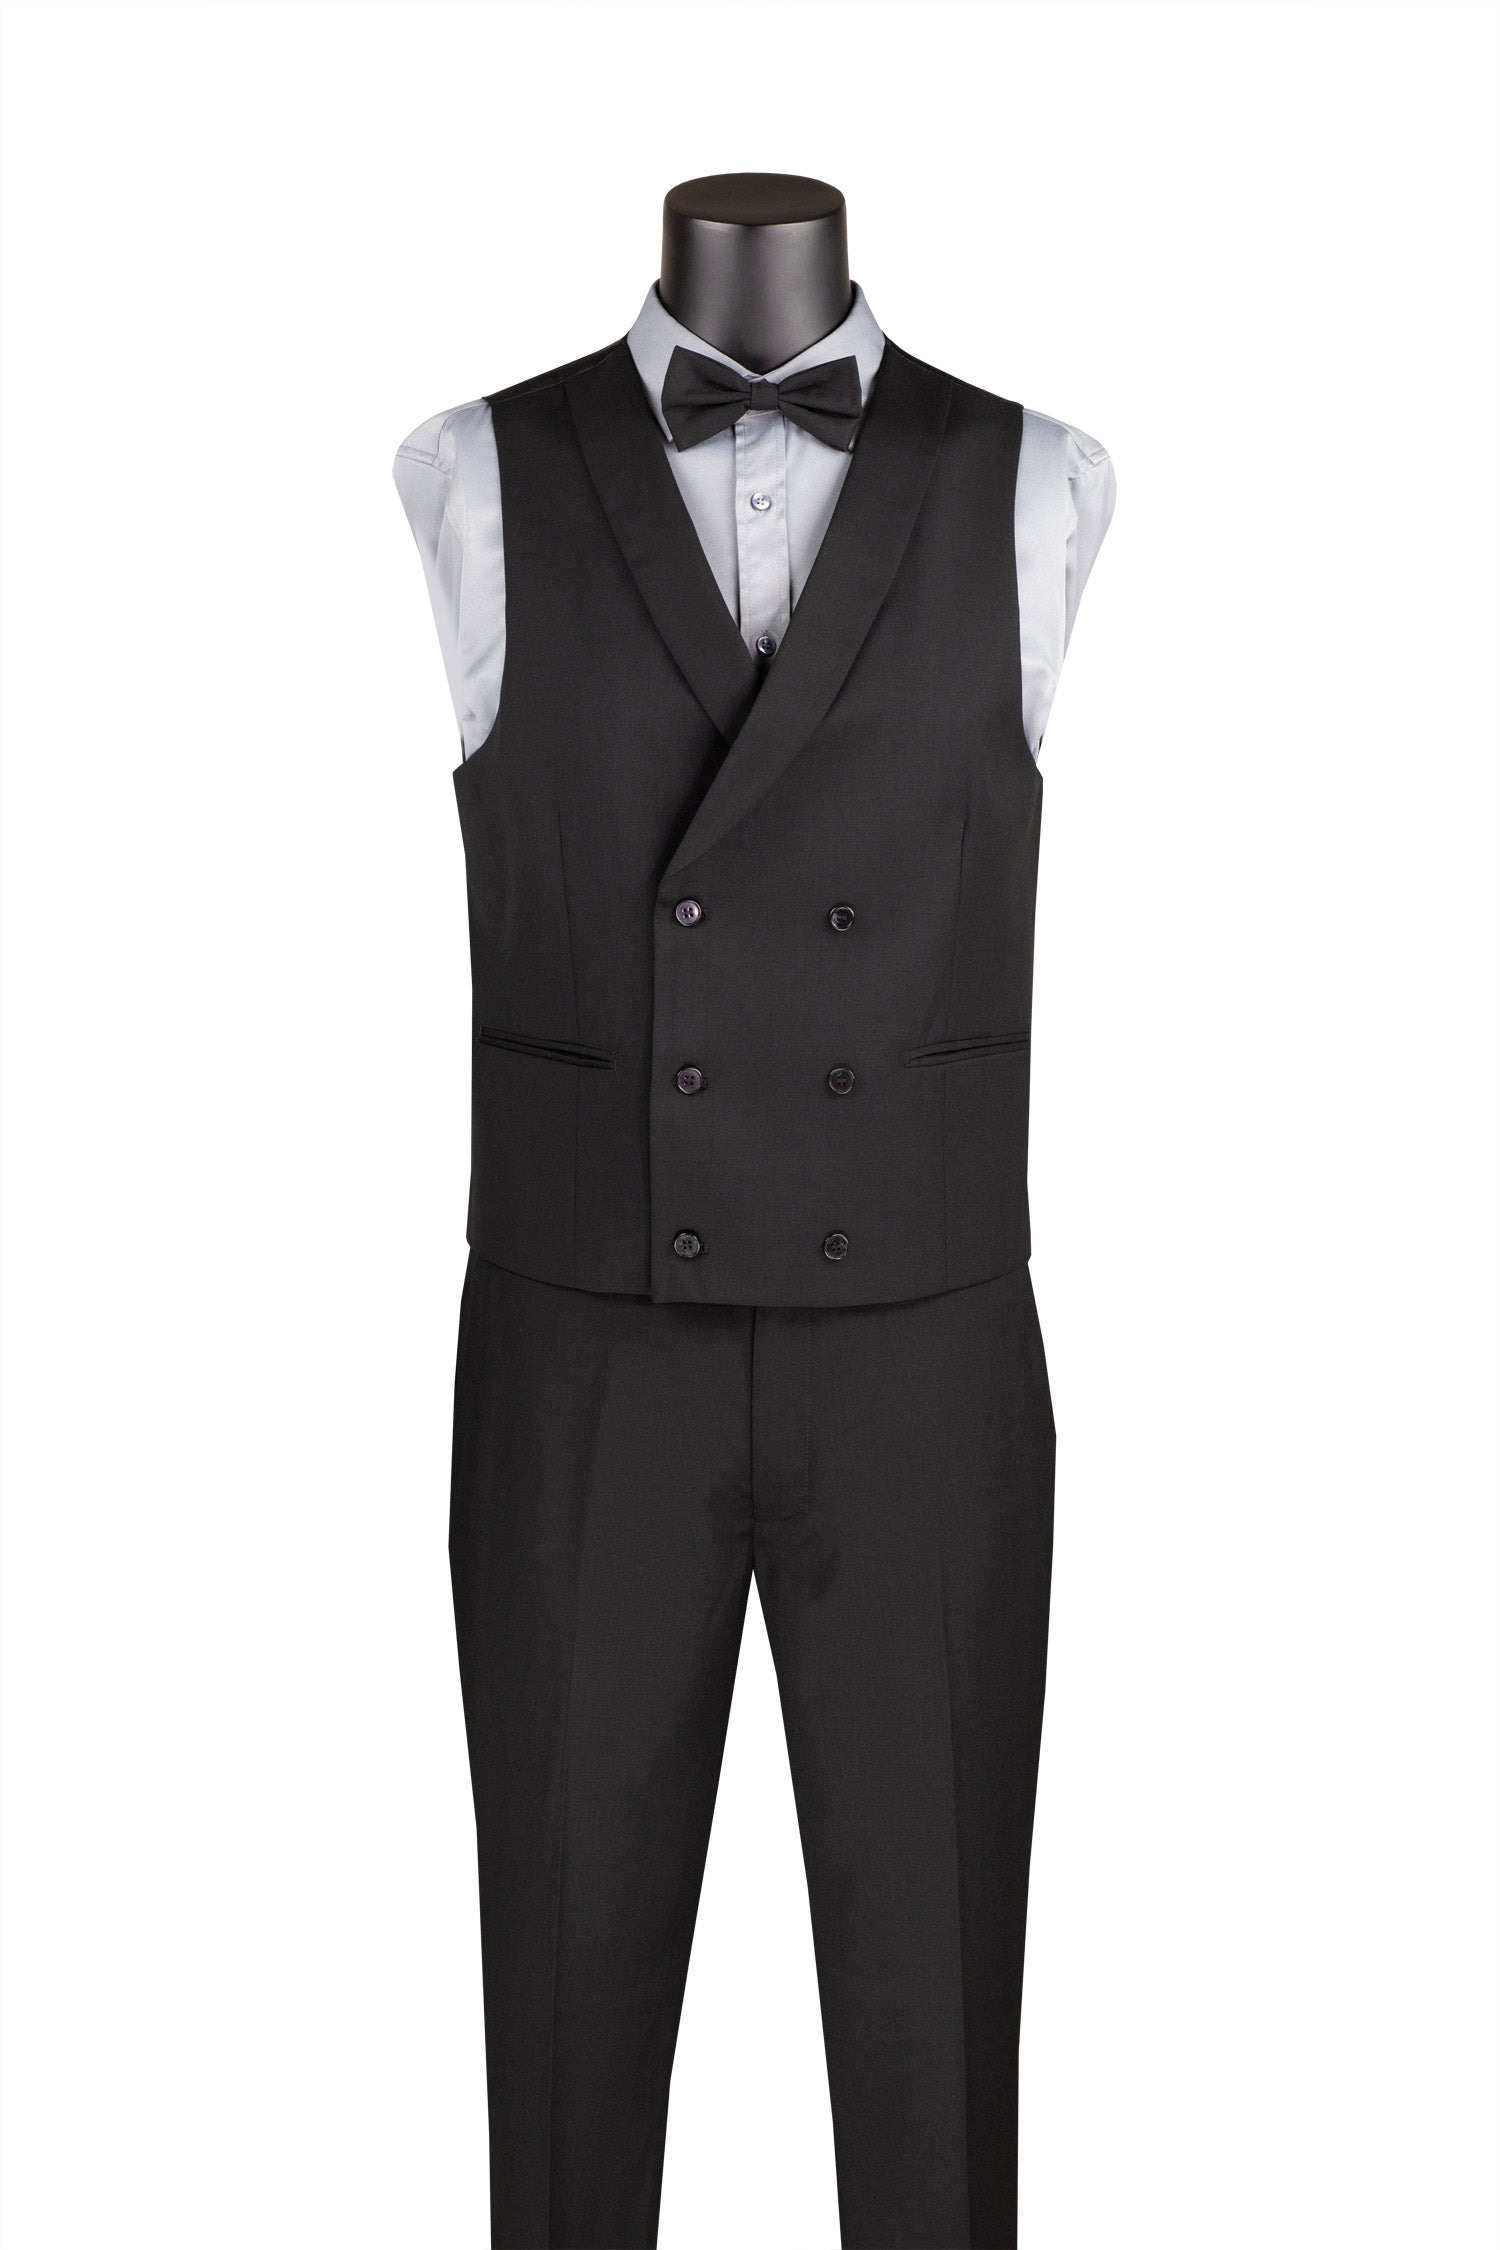 Slim Fit Tuxedo 3 Piece with Matching Bow Tie in Black